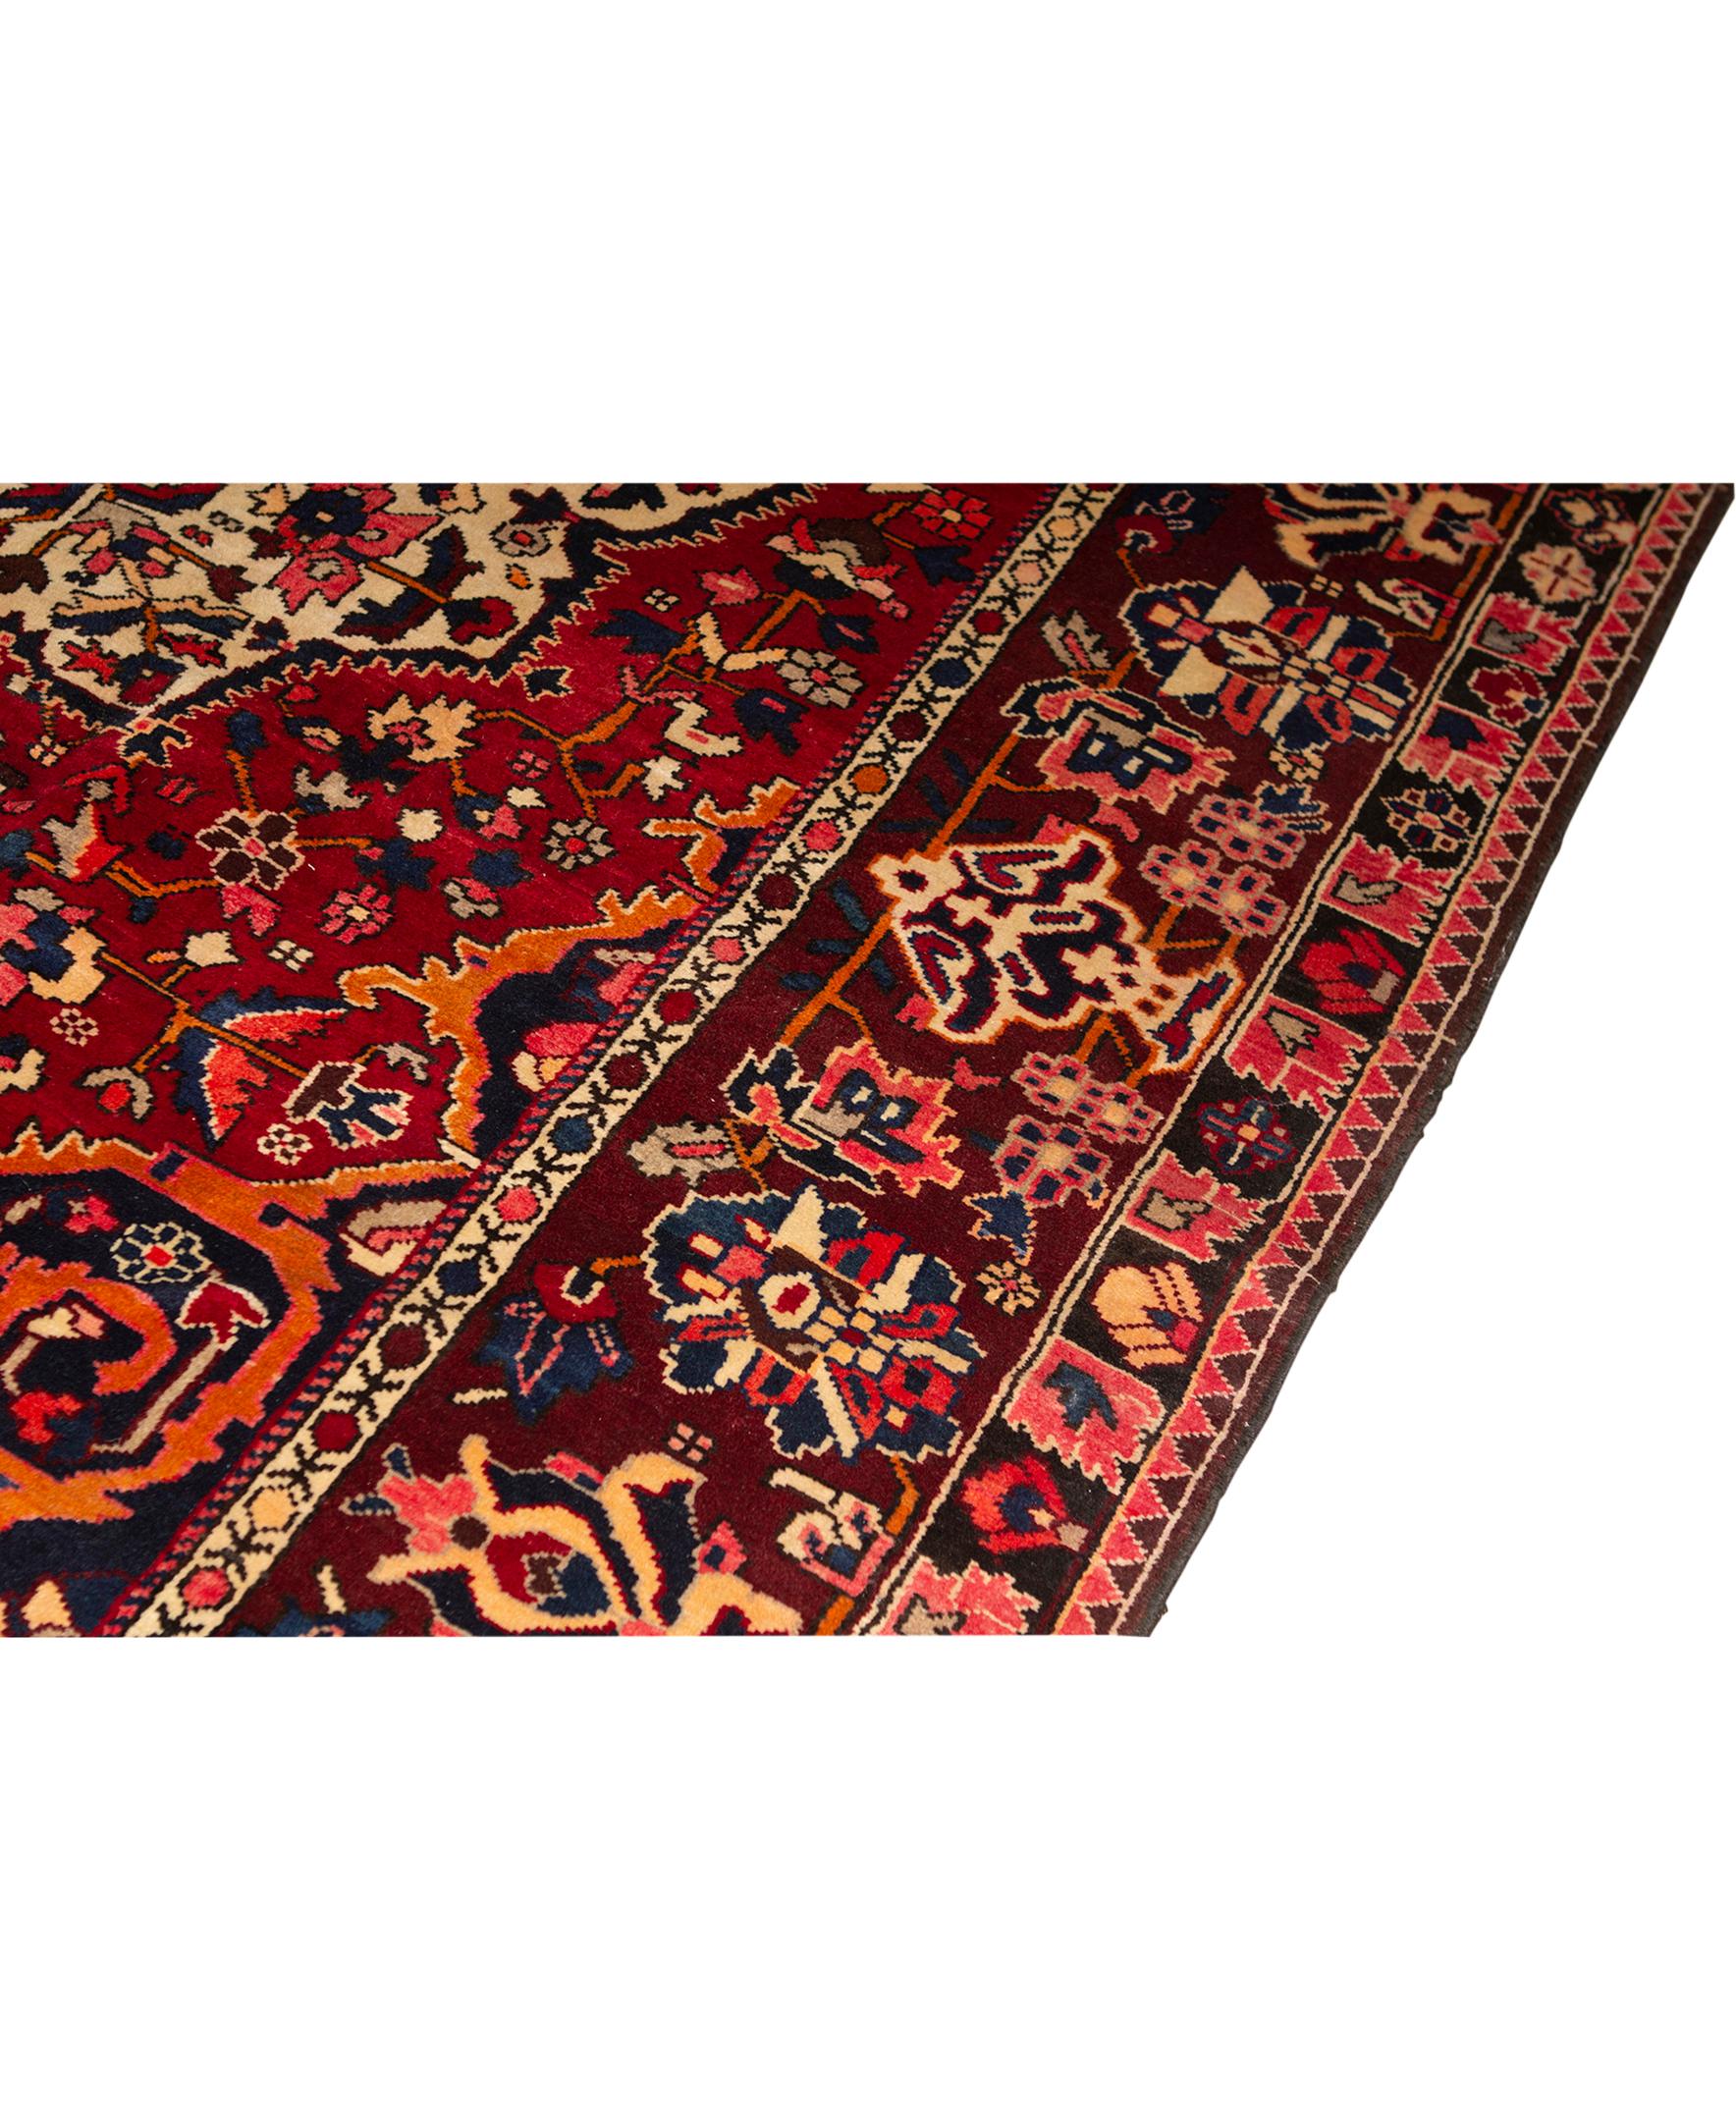   Antique Persian Fine Traditional Handwoven Luxury Wool Red Rug. Size: 9'-11